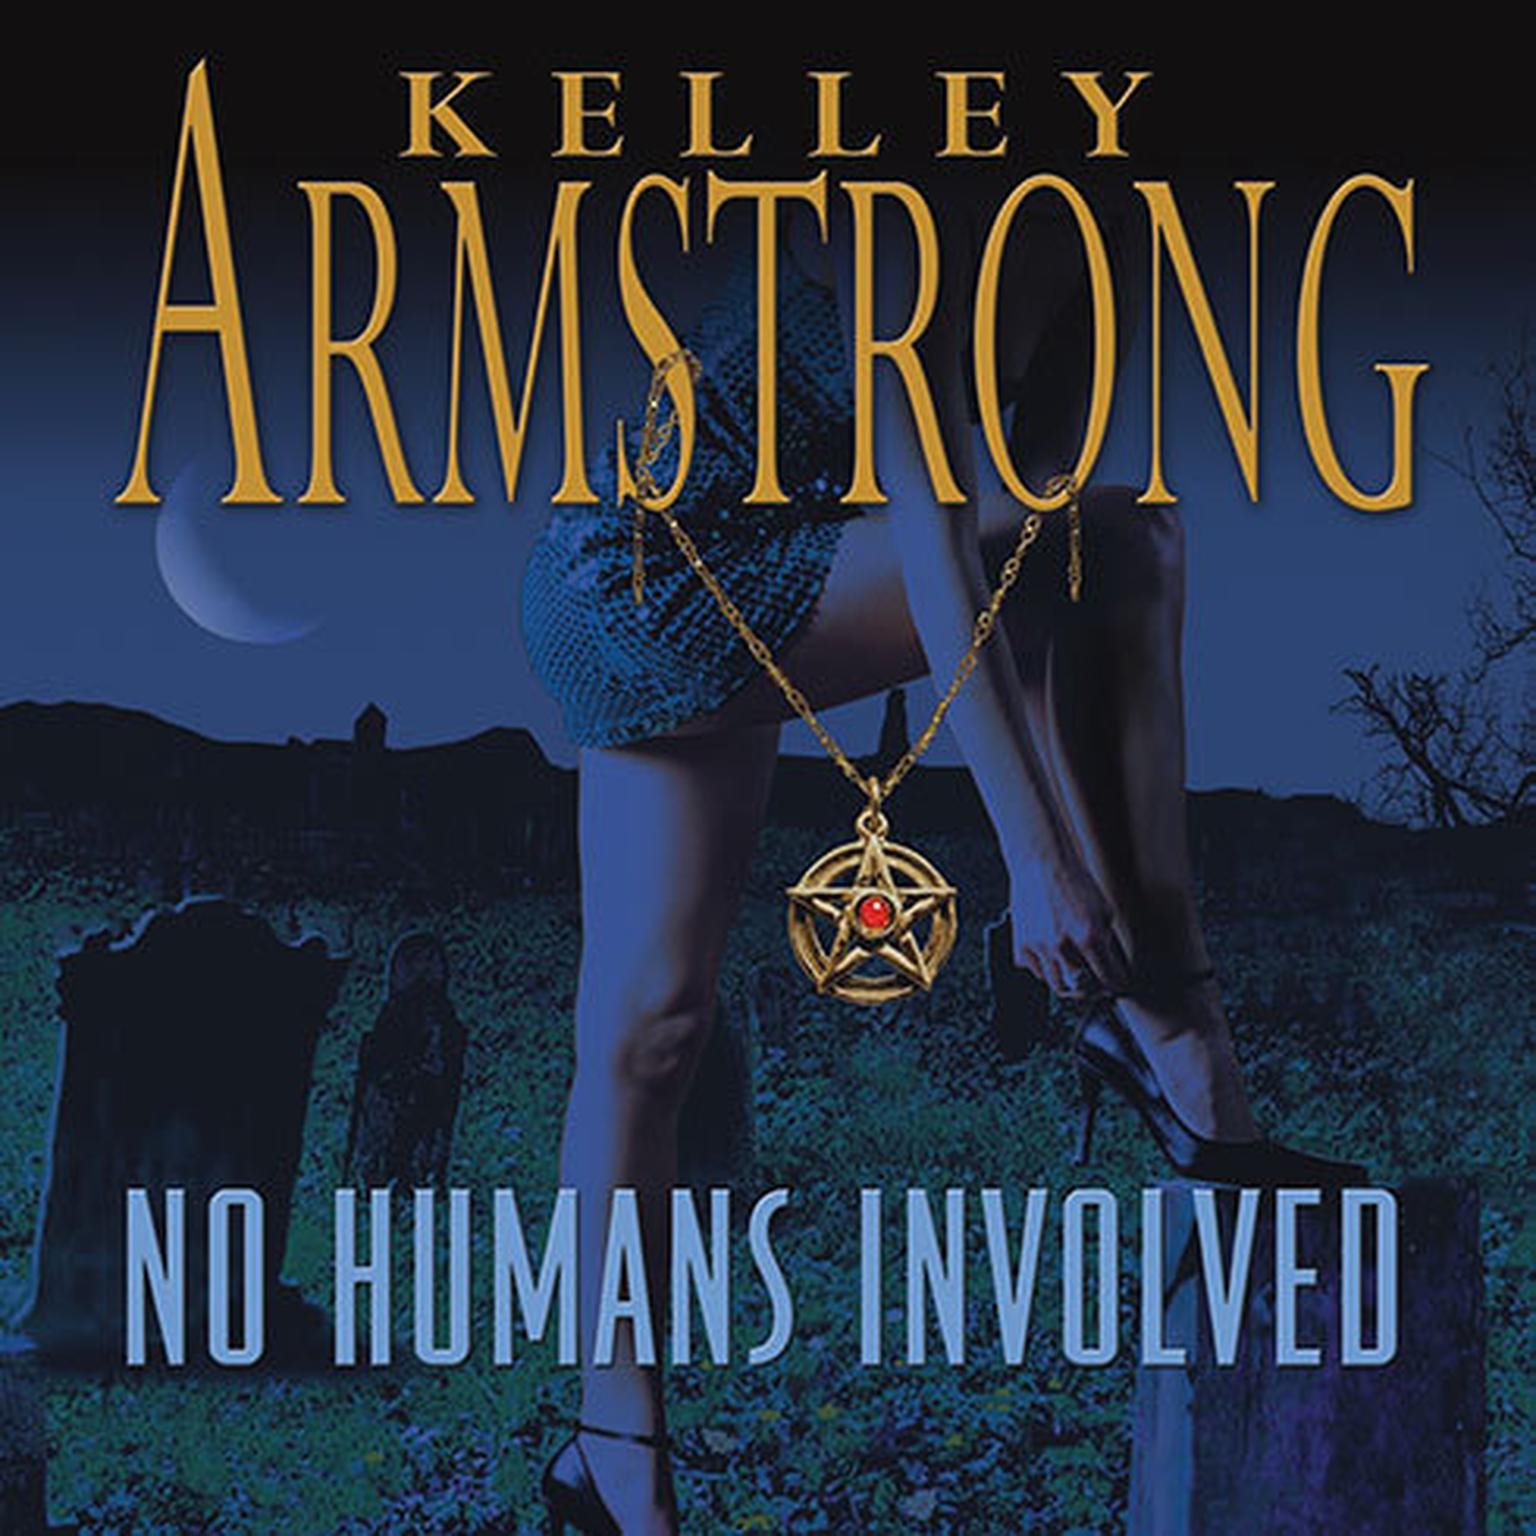 No Humans Involved Audiobook, by Kelley Armstrong